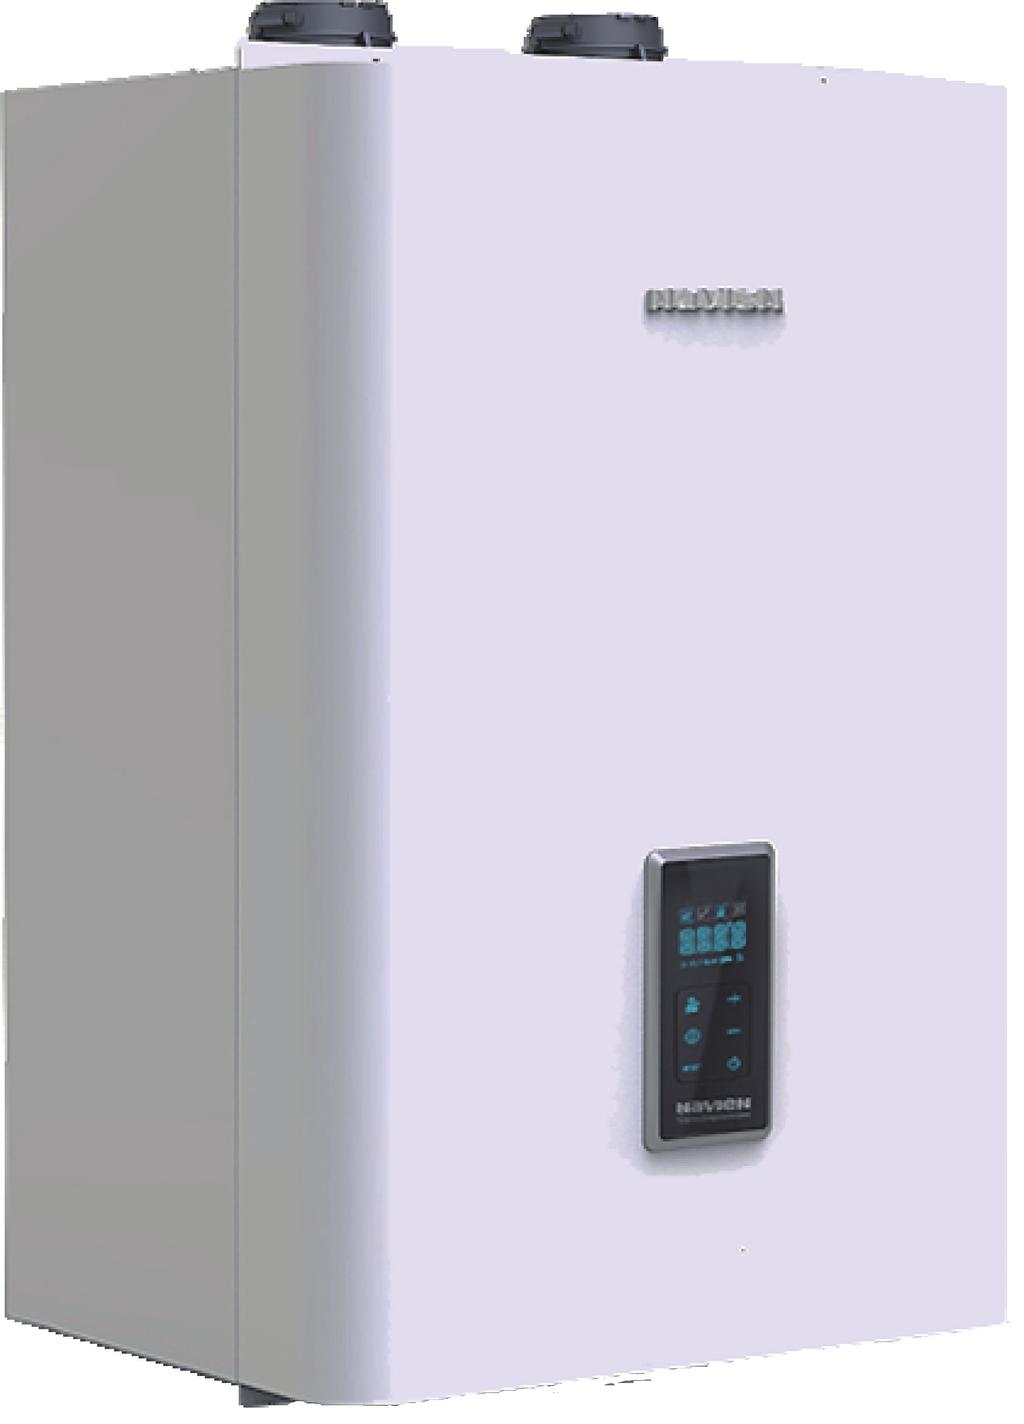 User s Information Manual Model NCB-180 / 210 / 240 Combination Boiler * Lead Free H Keep this manual near this boiler for future reference whenever maintenance or service is required.